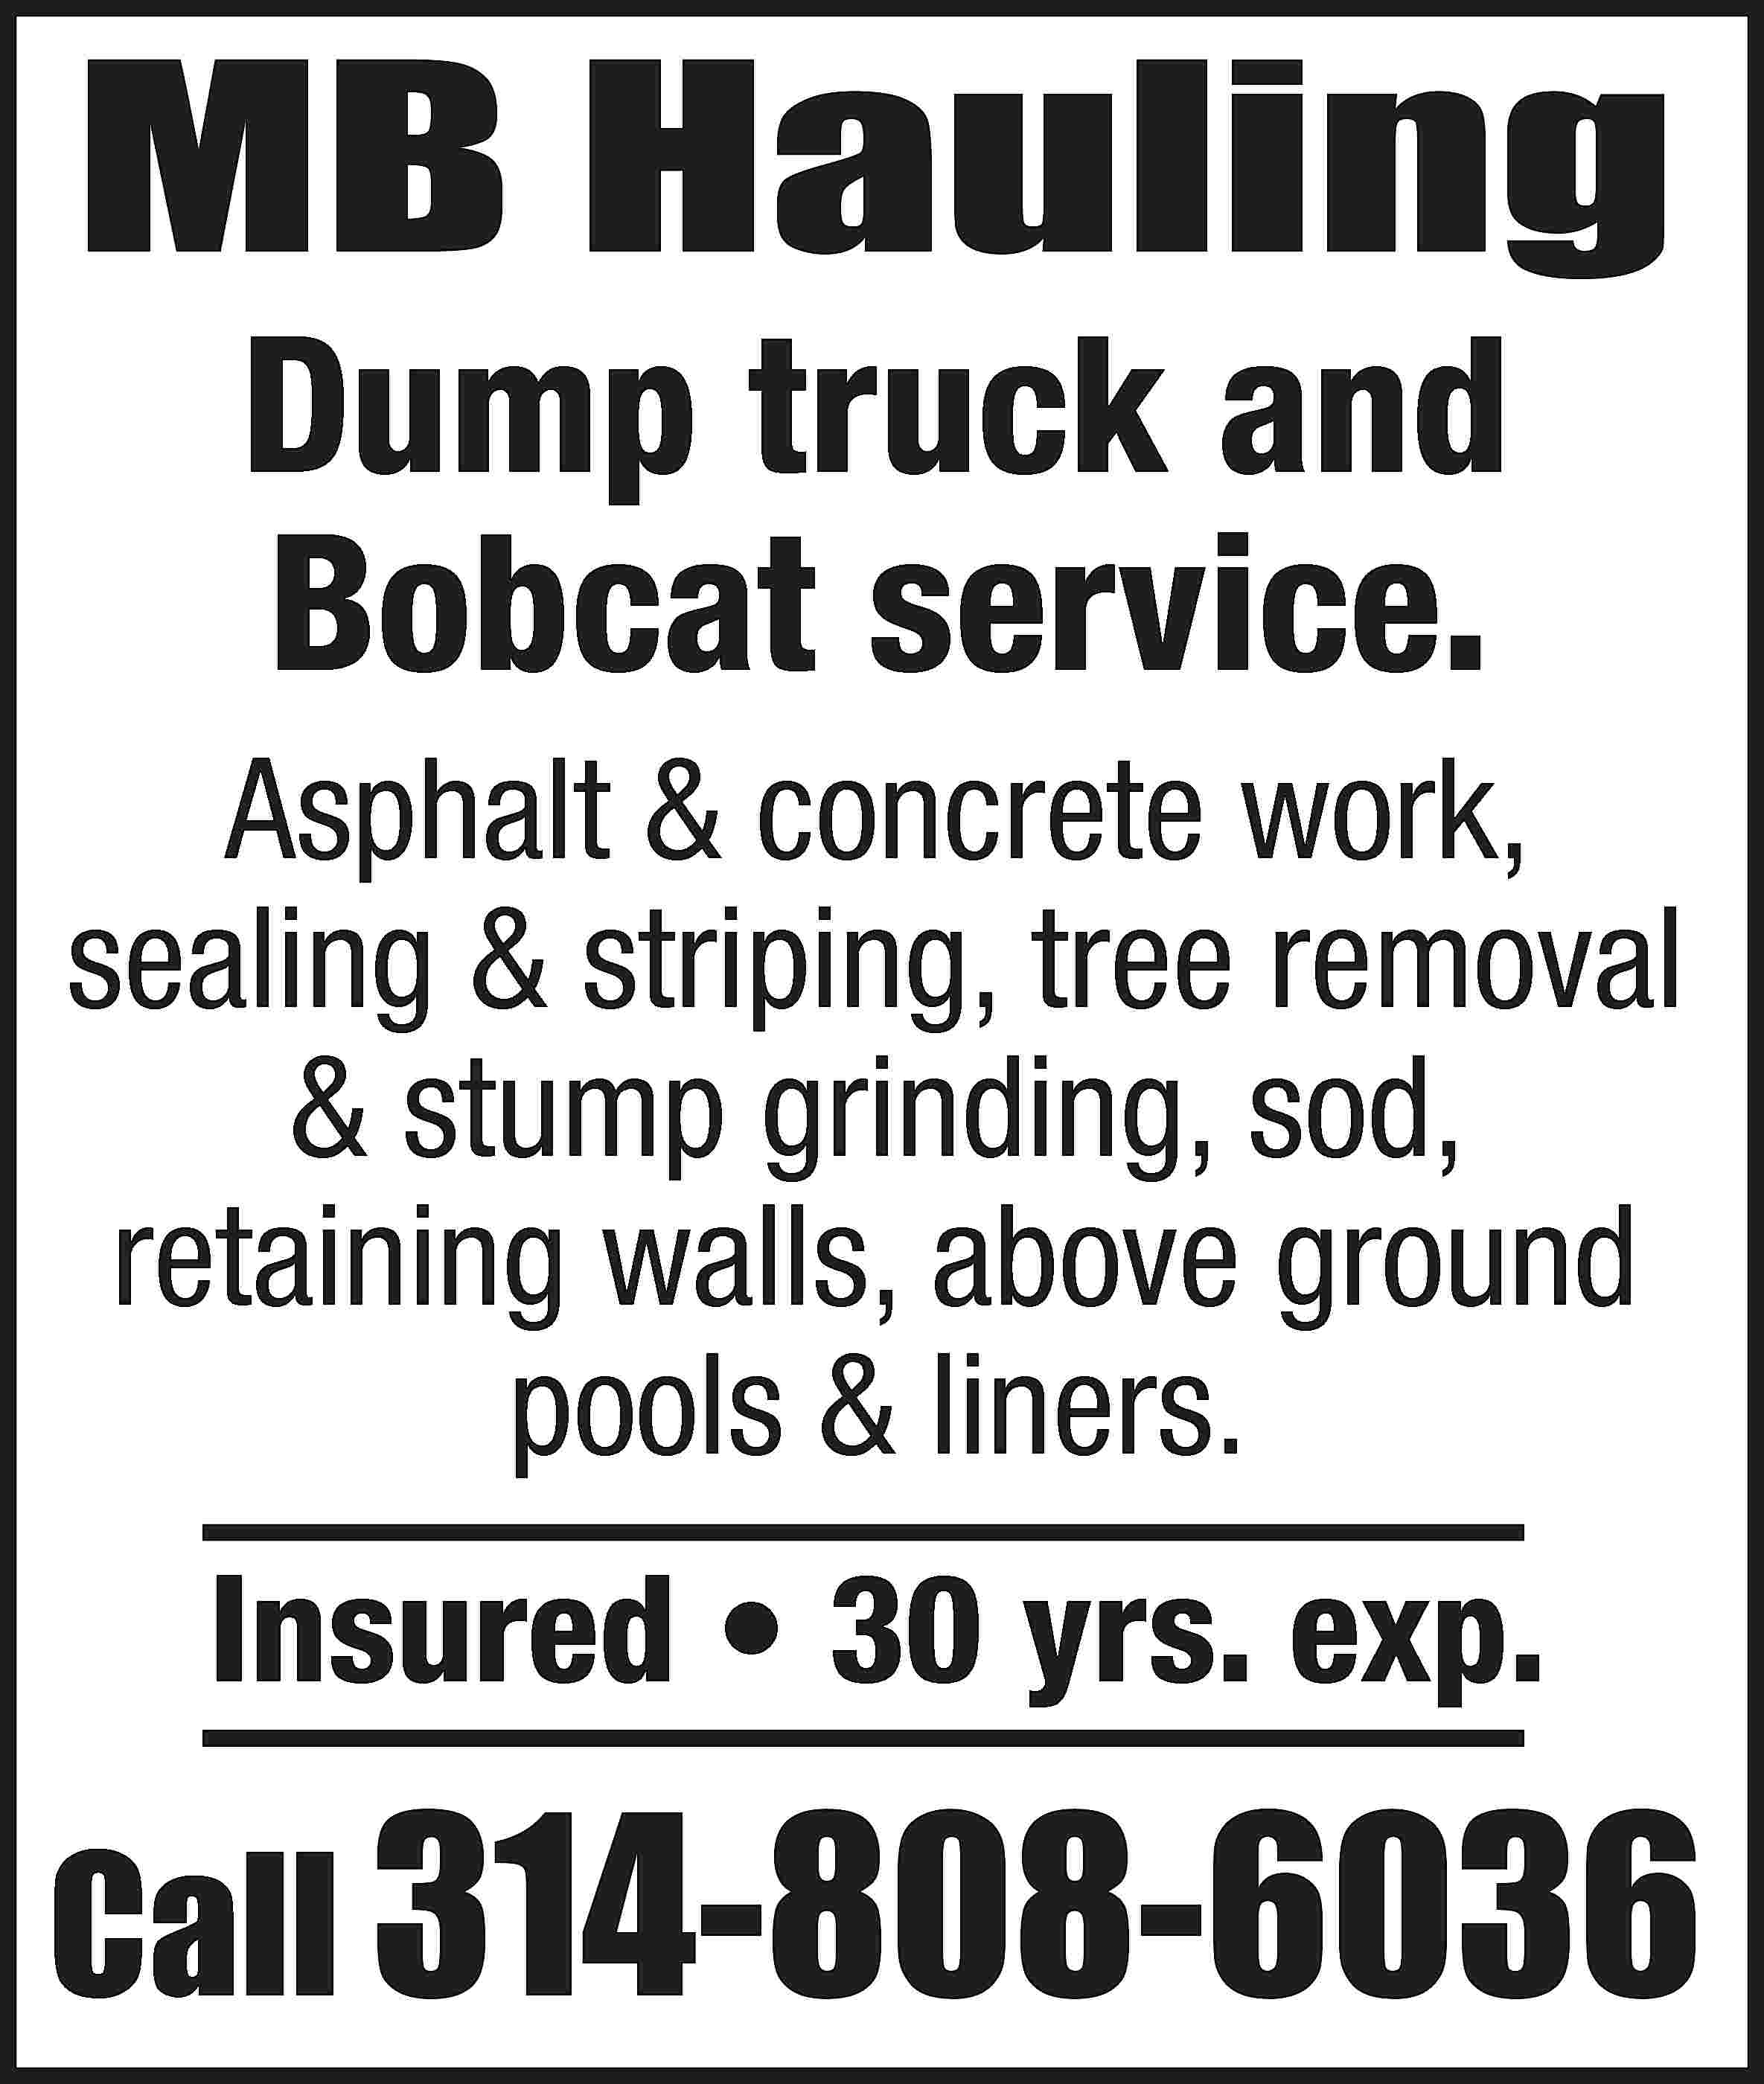 MB Hauling Dump truck and  MB Hauling Dump truck and Bobcat service. Asphalt & concrete work, sealing & striping, tree removal & stump grinding, sod, retaining walls, above ground pools & liners. Insured • 30 yrs. exp. Call 314-808-6036